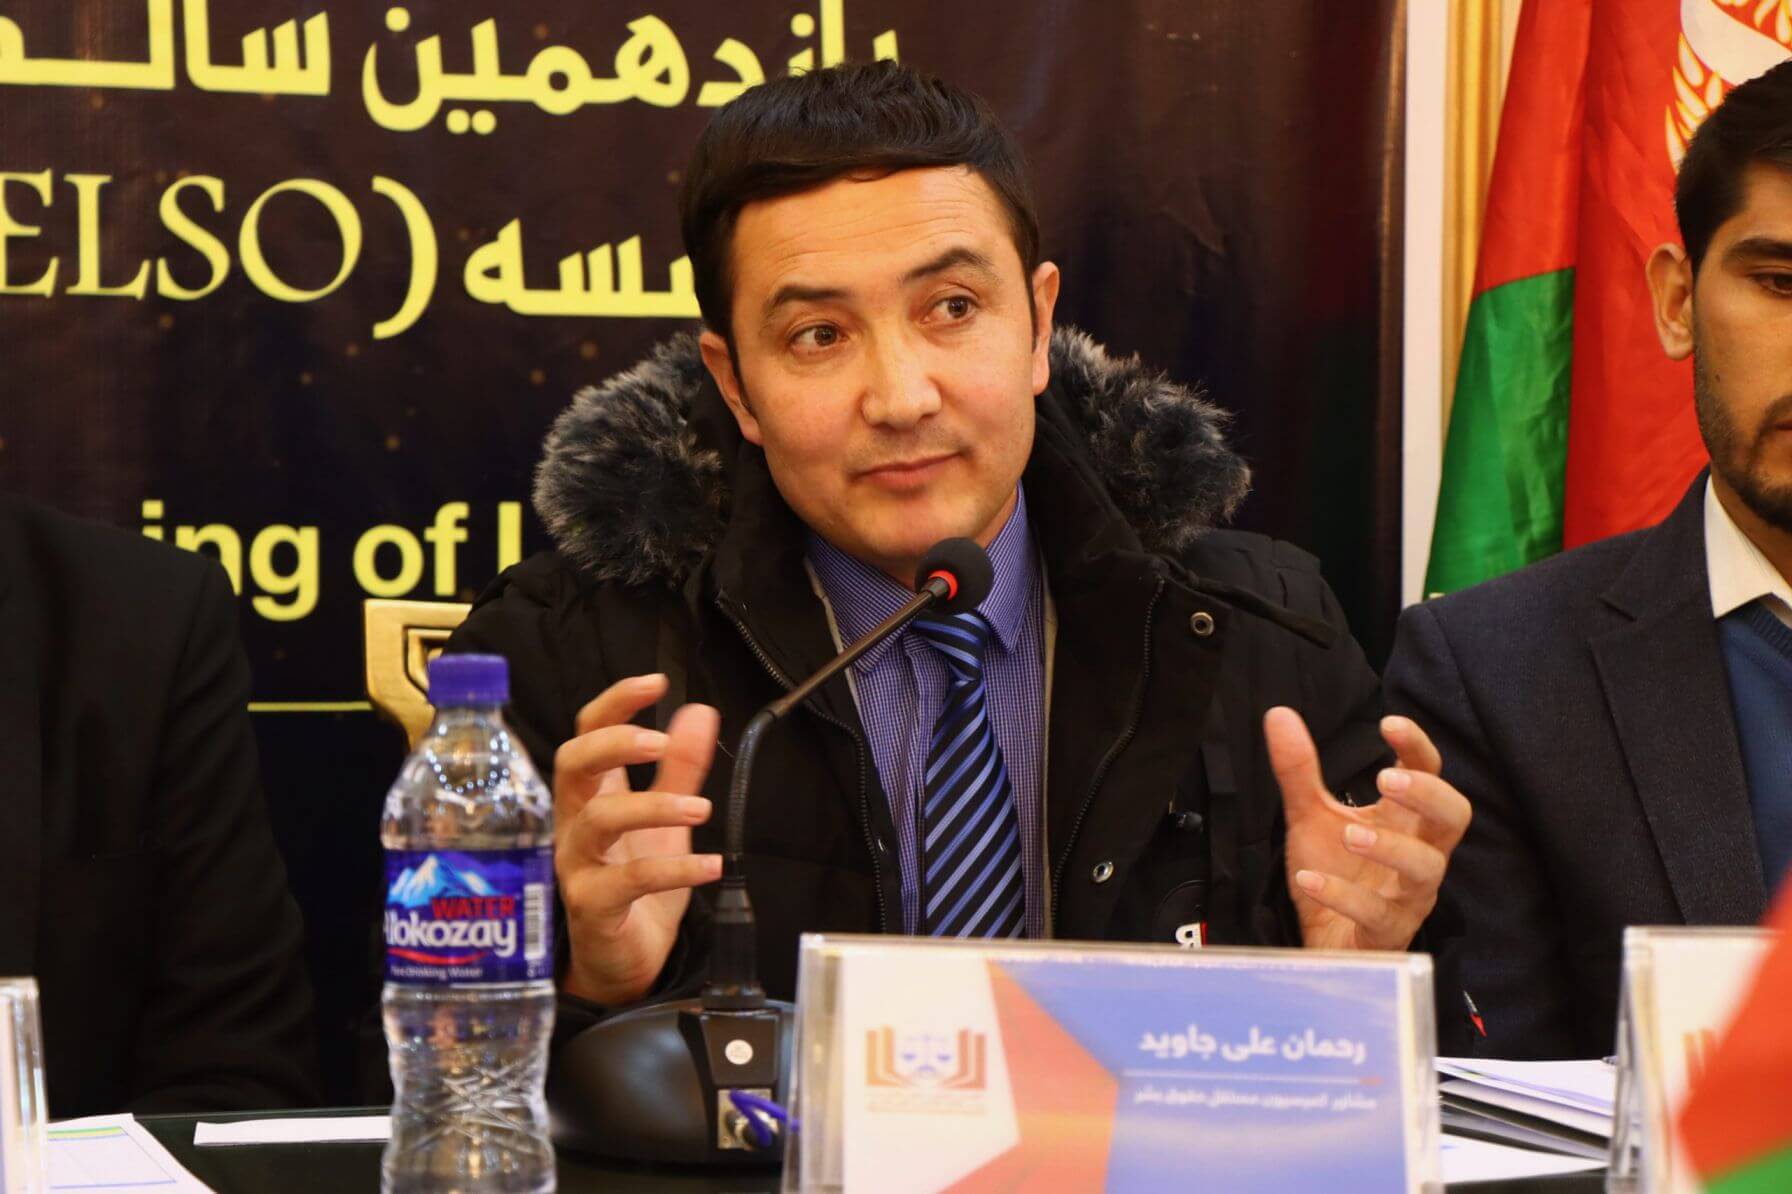 Rahman Ali Javed, Senior Human Rights Education Advisor of the Afghanistan Independent Human Rights Commission (AIHRC)